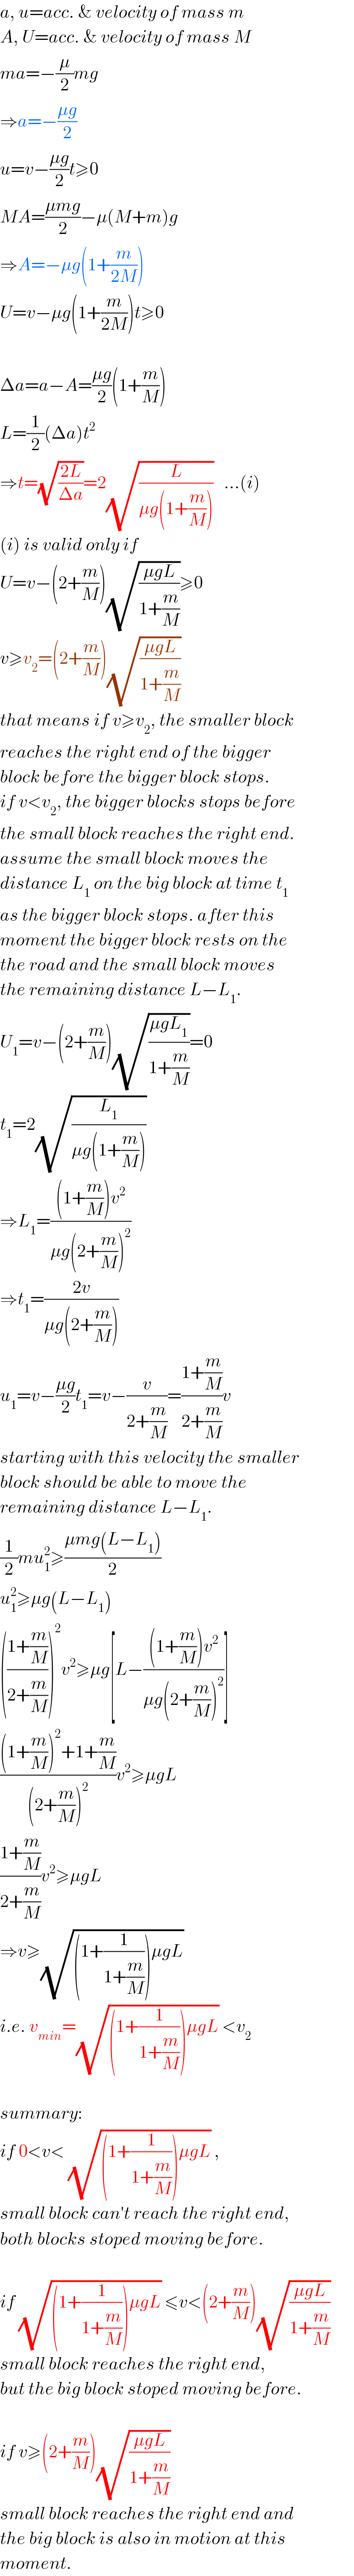 a, u=acc. & velocity of mass m  A, U=acc. & velocity of mass M  ma=−(μ/2)mg  ⇒a=−((μg)/2)  u=v−((μg)/2)t≥0  MA=((μmg)/2)−μ(M+m)g  ⇒A=−μg(1+(m/(2M)))  U=v−μg(1+(m/(2M)))t≥0    Δa=a−A=((μg)/2)(1+(m/M))  L=(1/2)(Δa)t^2   ⇒t=(√((2L)/(Δa)))=2(√(L/(μg(1+(m/M)))))   ...(i)  (i) is valid only if  U=v−(2+(m/M))(√((μgL)/(1+(m/M))))≥0  v≥v_2 =(2+(m/M))(√((μgL)/(1+(m/M))))  that means if v≥v_2 , the smaller block  reaches the right end of the bigger  block before the bigger block stops.  if v<v_2 , the bigger blocks stops before  the small block reaches the right end.  assume the small block moves the  distance L_1  on the big block at time t_1   as the bigger block stops. after this  moment the bigger block rests on the  the road and the small block moves  the remaining distance L−L_1 .  U_1 =v−(2+(m/M))(√((μgL_1 )/(1+(m/M))))=0  t_1 =2(√(L_1 /(μg(1+(m/M)))))  ⇒L_1 =(((1+(m/M))v^2 )/(μg(2+(m/M))^2 ))  ⇒t_1 =((2v)/(μg(2+(m/M))))  u_1 =v−((μg)/2)t_1 =v−(v/(2+(m/M)))=((1+(m/M))/(2+(m/M)))v  starting with this velocity the smaller  block should be able to move the  remaining distance L−L_1 .  (1/2)mu_1 ^2 ≥((μmg(L−L_1 ))/2)  u_1 ^2 ≥μg(L−L_1 )  (((1+(m/M))/(2+(m/M))))^2 v^2 ≥μg[L−(((1+(m/M))v^2 )/(μg(2+(m/M))^2 ))]  (((1+(m/M))^2 +1+(m/M))/((2+(m/M))^2 ))v^2 ≥μgL  ((1+(m/M))/(2+(m/M)))v^2 ≥μgL  ⇒v≥(√((1+(1/(1+(m/M))))μgL))  i.e. v_(min) =(√((1+(1/(1+(m/M))))μgL)) <v_2     summary:  if 0<v< (√((1+(1/(1+(m/M))))μgL)) ,  small block can′t reach the right end,  both blocks stoped moving before.    if (√((1+(1/(1+(m/M))))μgL)) ≤v<(2+(m/M))(√((μgL)/(1+(m/M))))  small block reaches the right end,  but the big block stoped moving before.    if v≥(2+(m/M))(√((μgL)/(1+(m/M))))  small block reaches the right end and  the big block is also in motion at this  moment.  